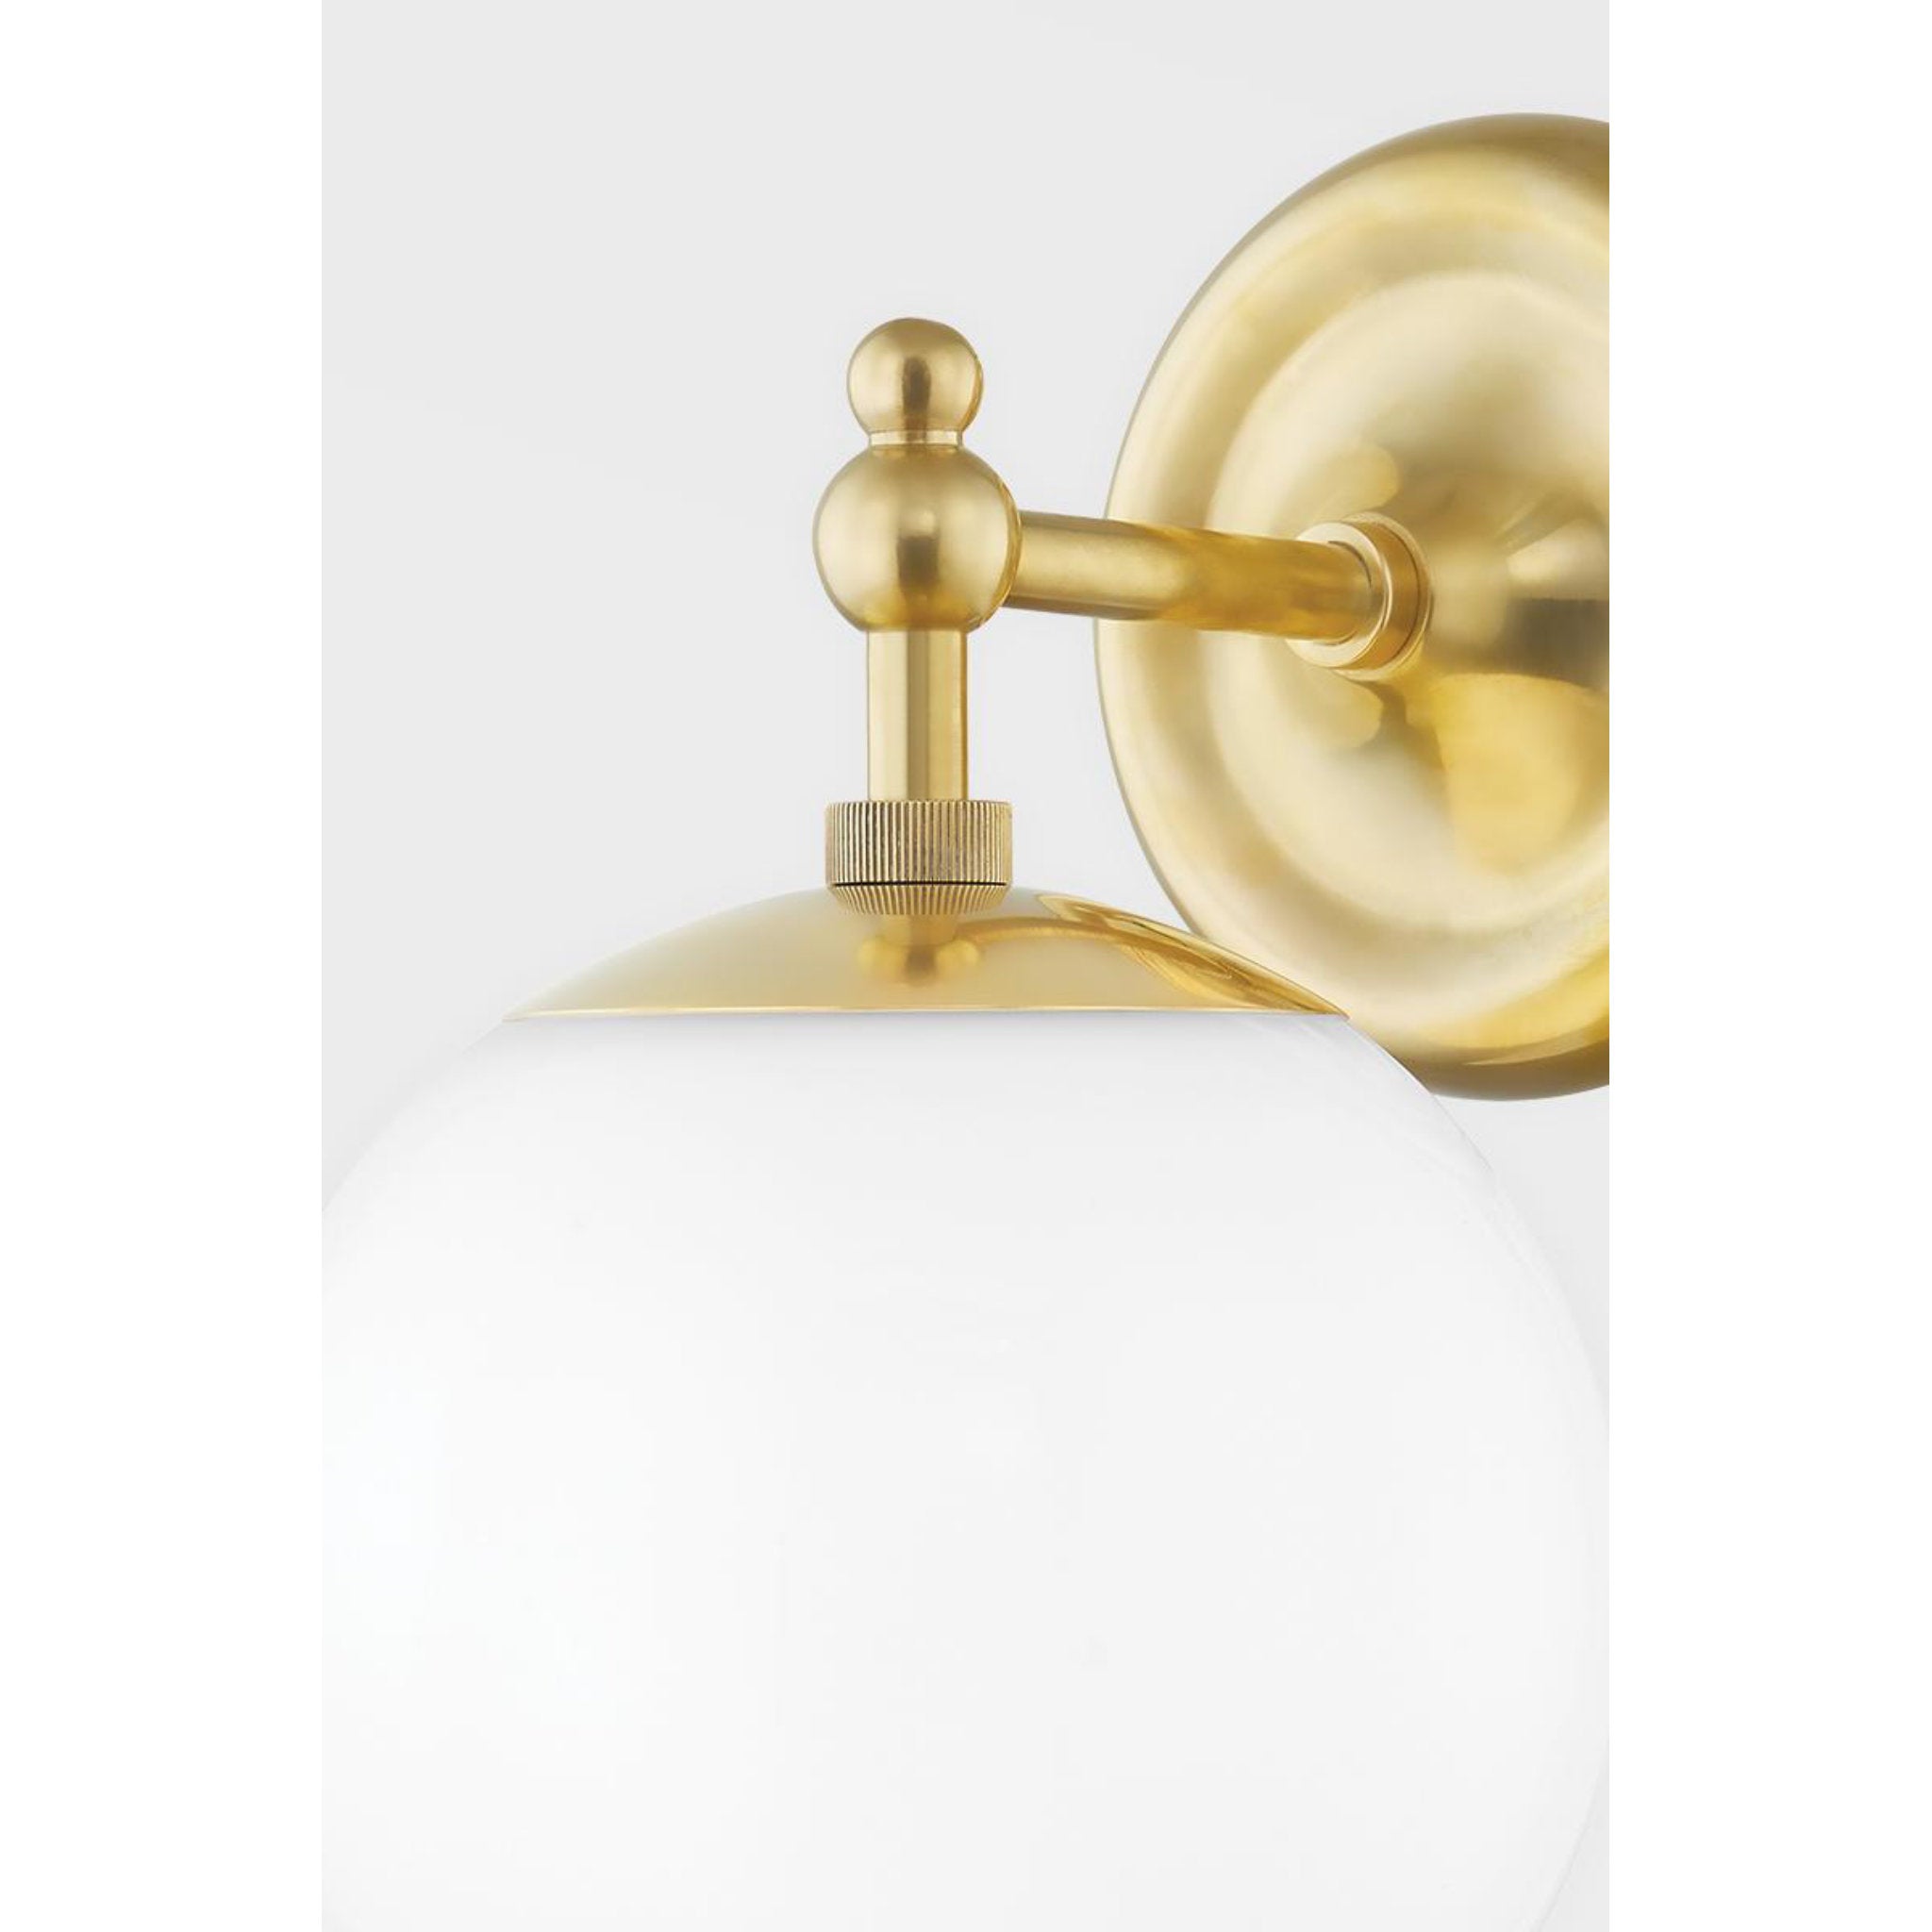 Sphere No.1 1 Light Pendant in Polished Nickel by Mark D. Sikes